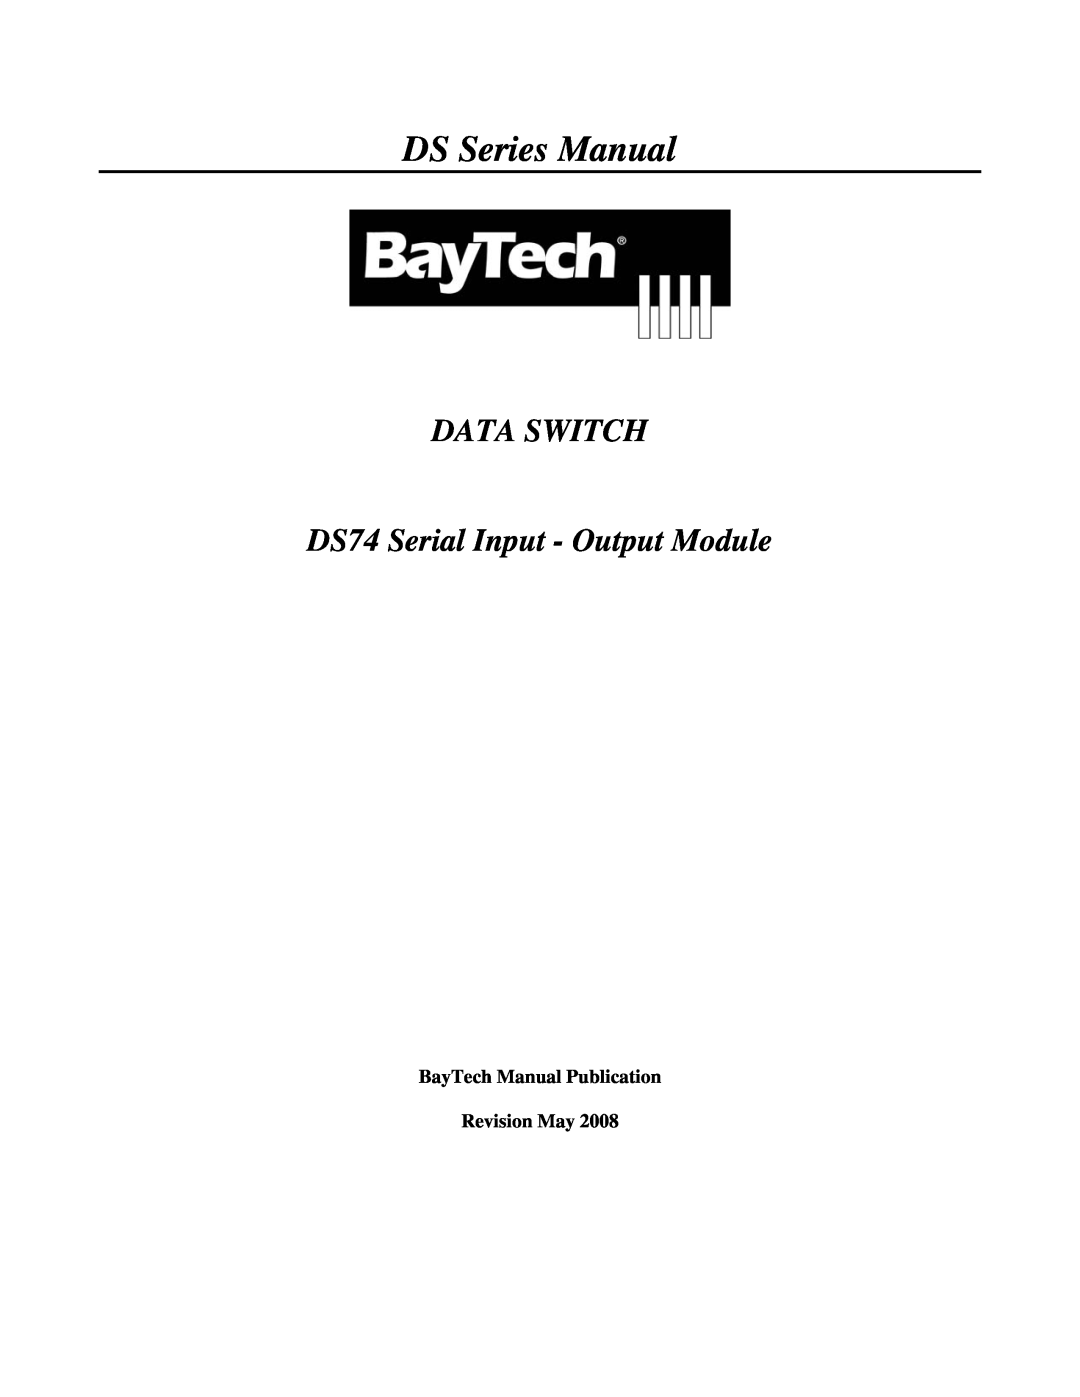 Bay Technical Associates manual DS Series Manual, DATA SWITCH DS74 Serial Input - Output Module 